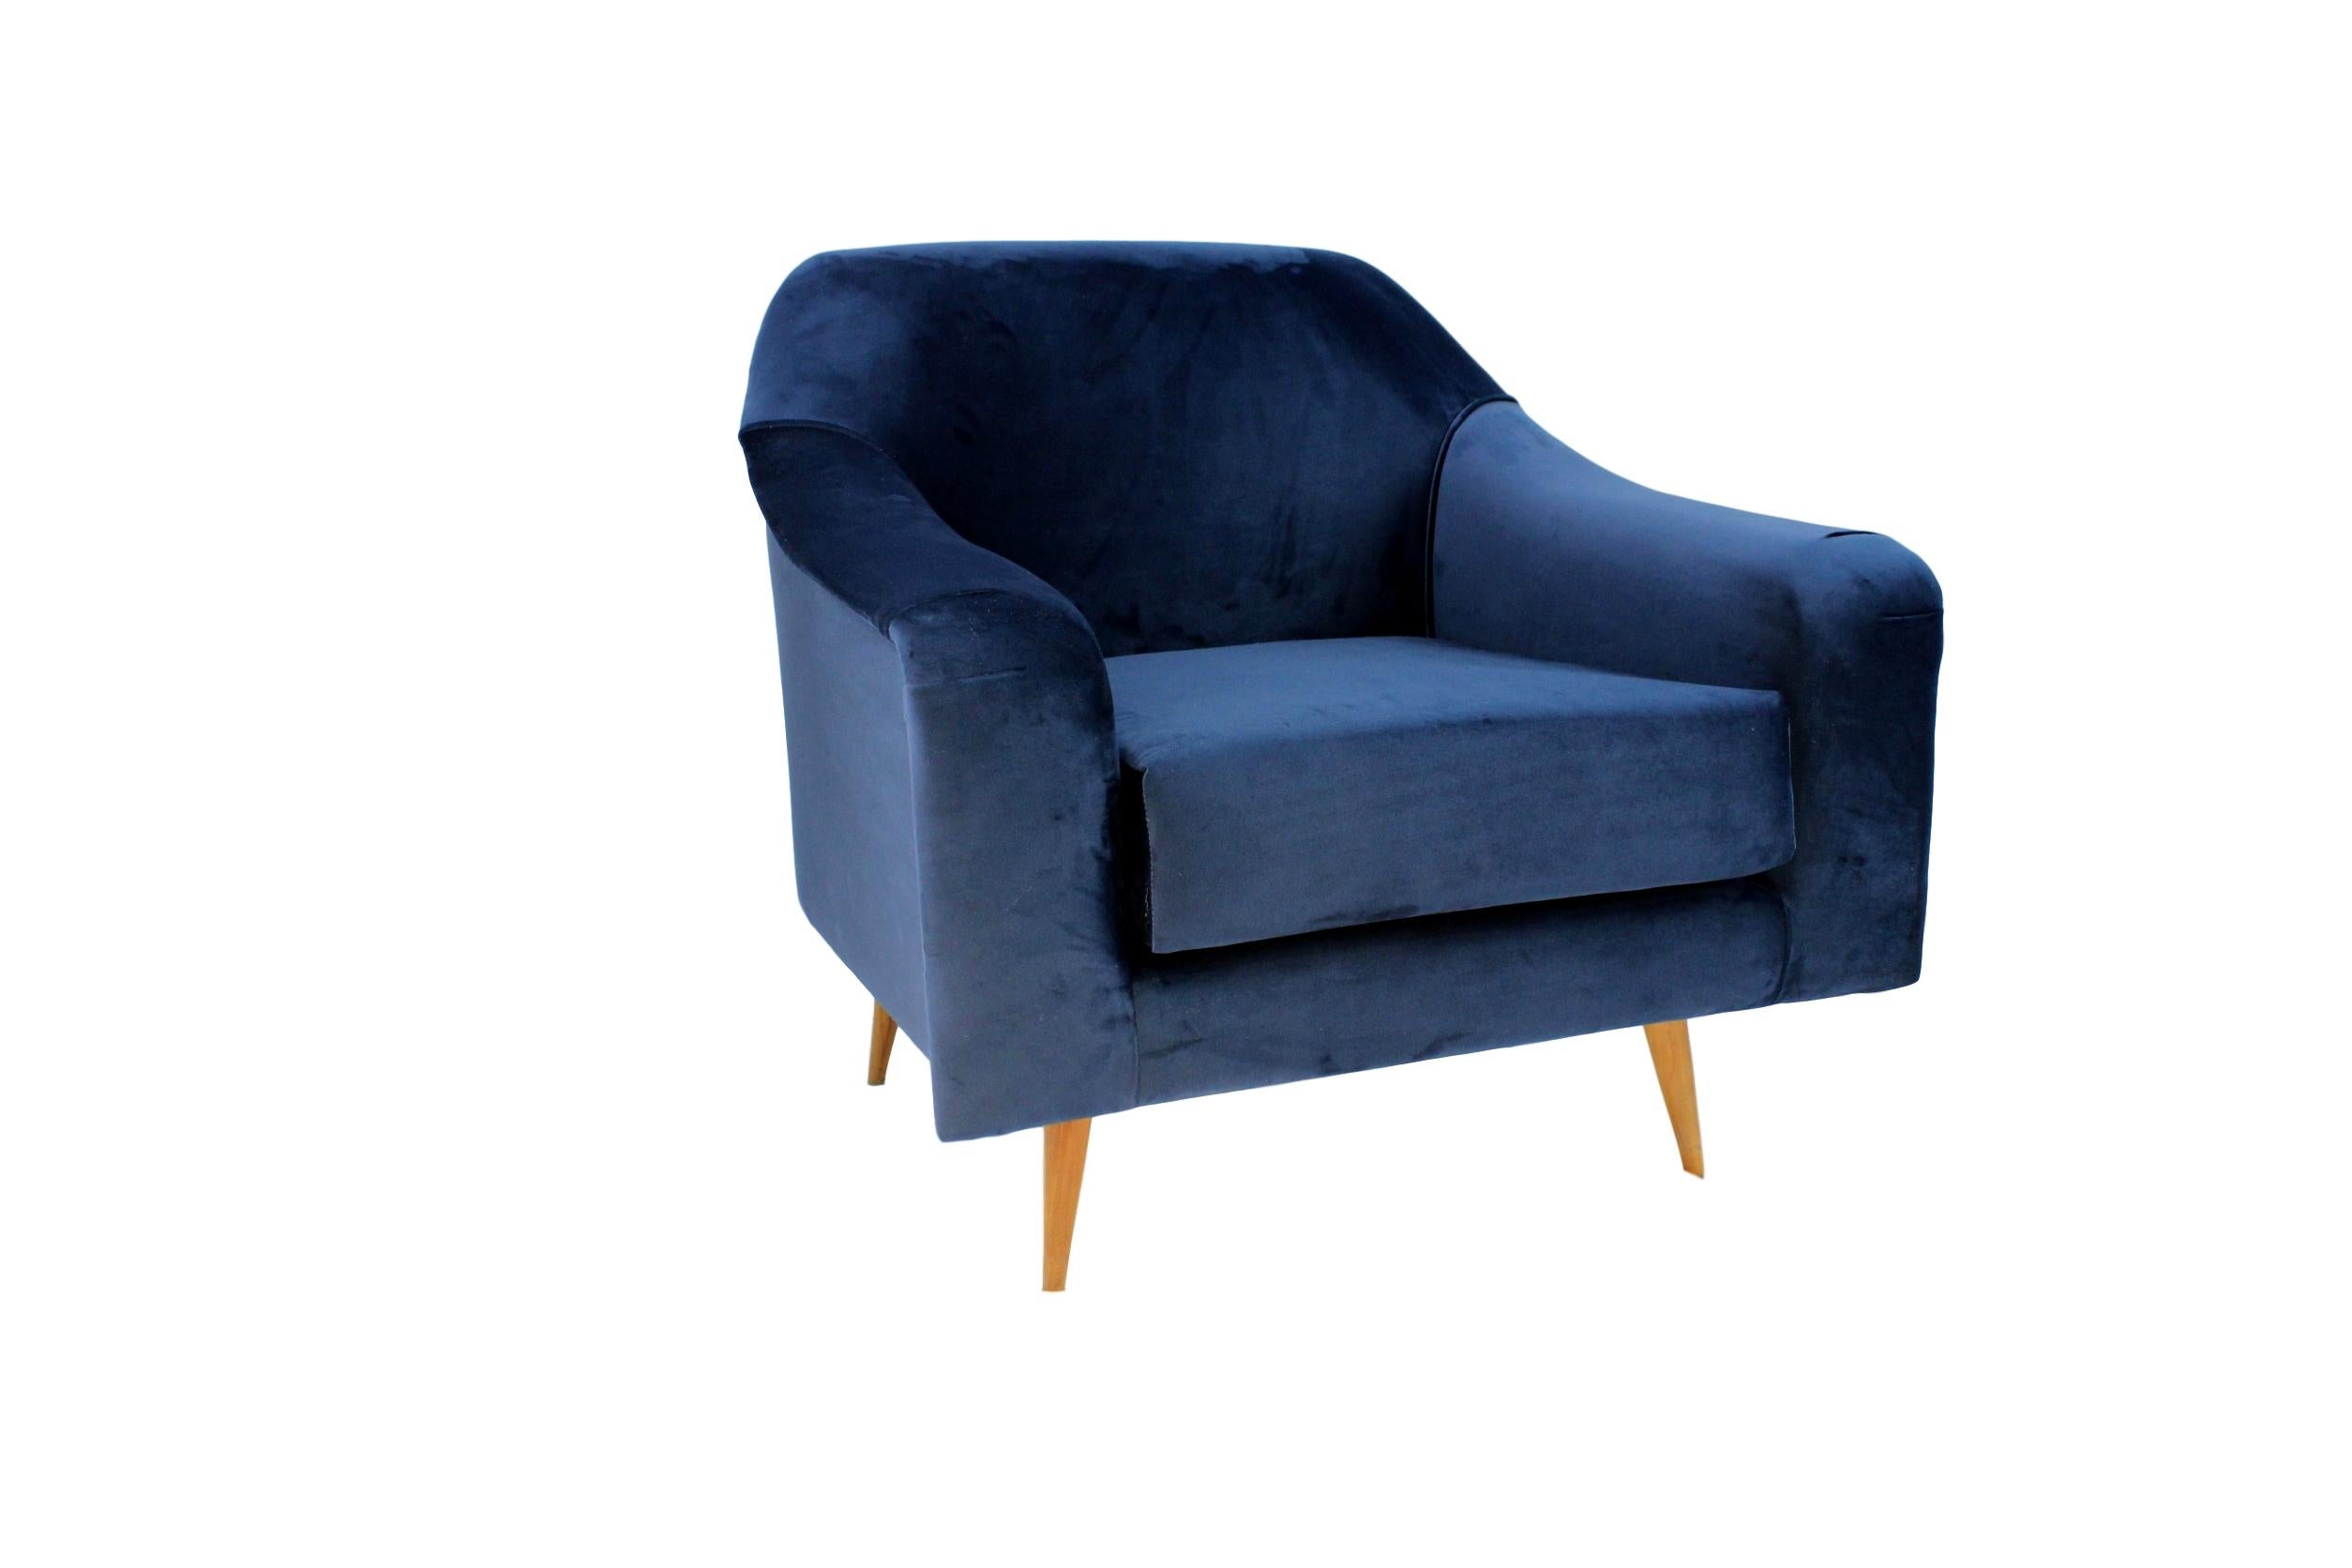 This iconic large armchair attributed to Joaquim Tenreiro is a must in your home, recently handcrafted upholstered in blue velvet presents a very nice touch and display well in any room. 

It's very comfy as well, ready to use, these chairs have